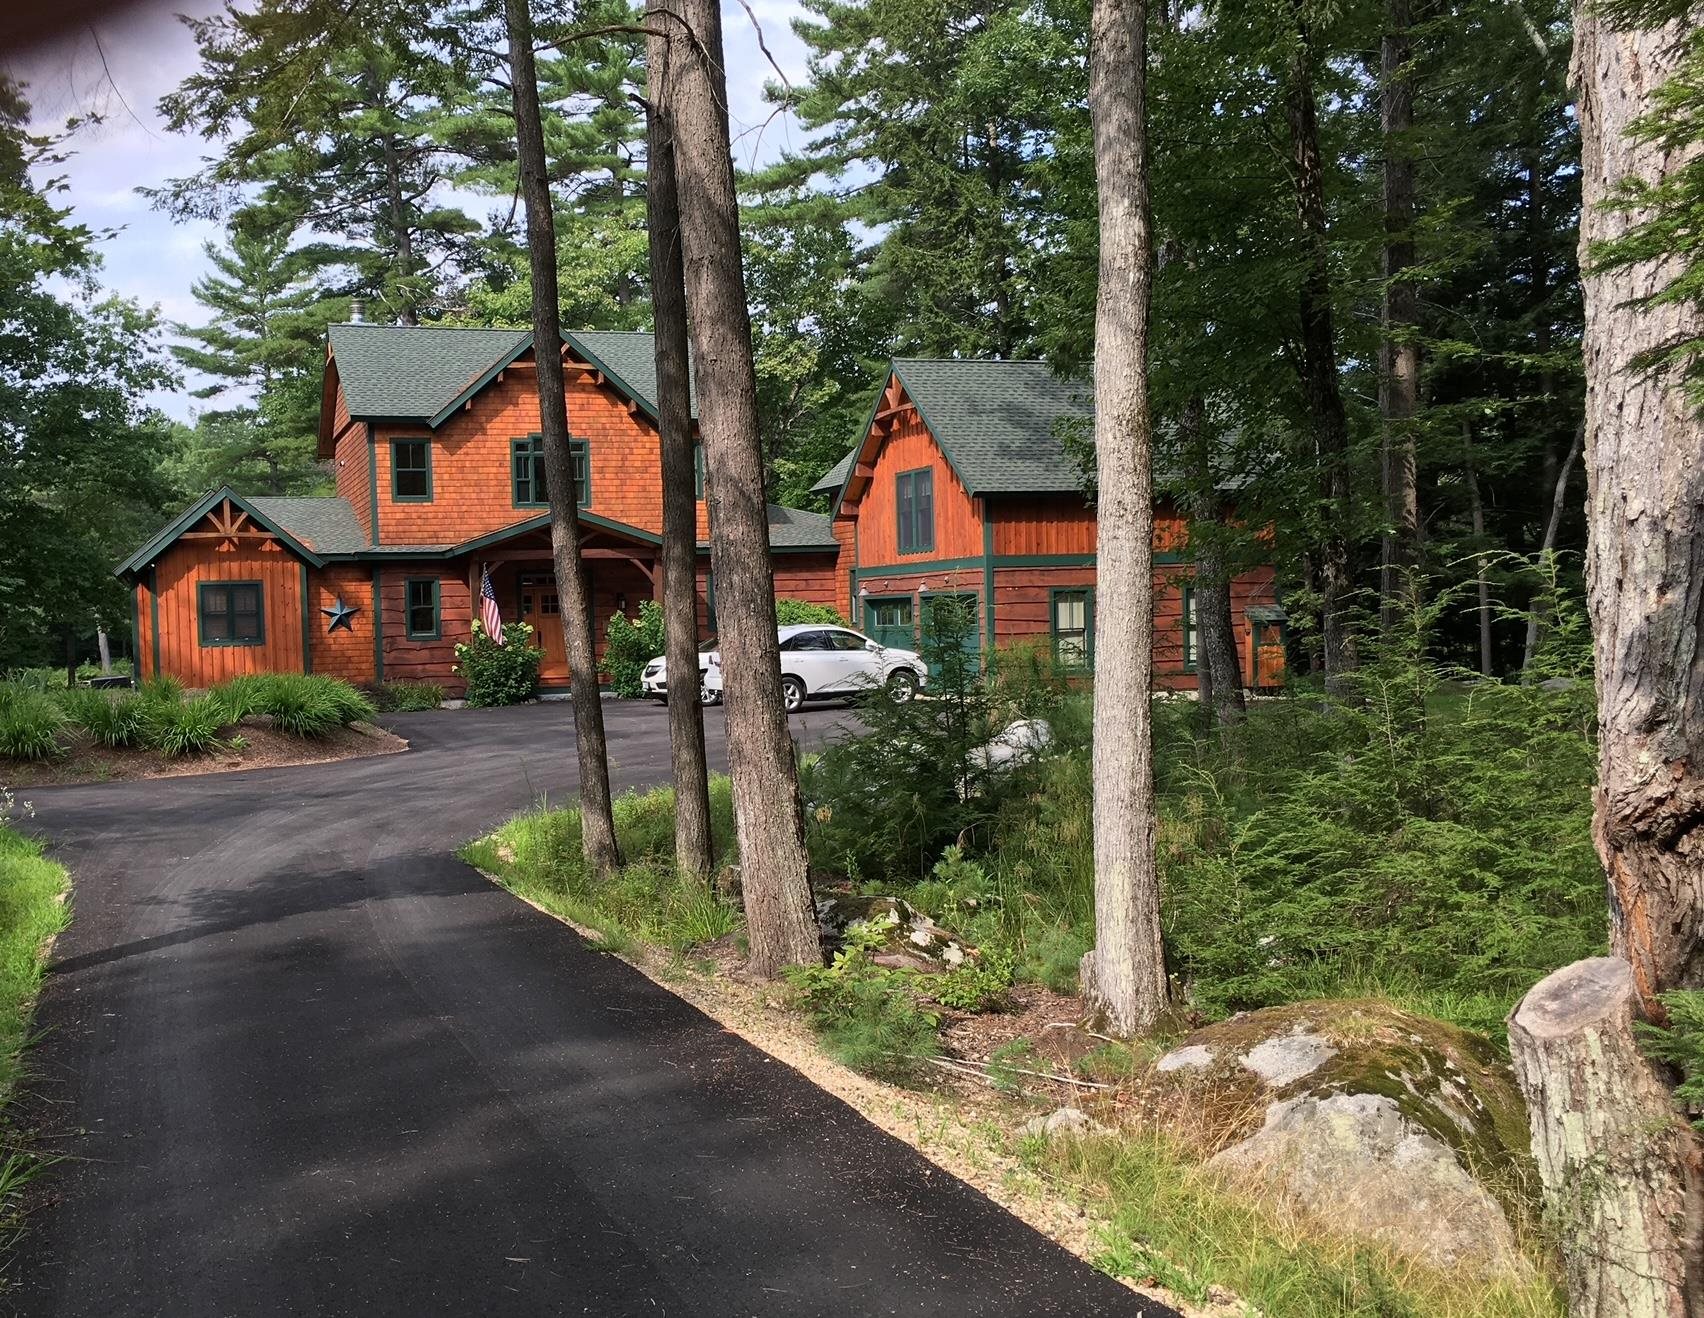 29 Loon Song Lane, Moultonborough, New Hampshire, NH 03254, 4 Bedrooms Bedrooms, 10 Rooms Rooms,3 BathroomsBathrooms,Single Family,For Sale,4895114